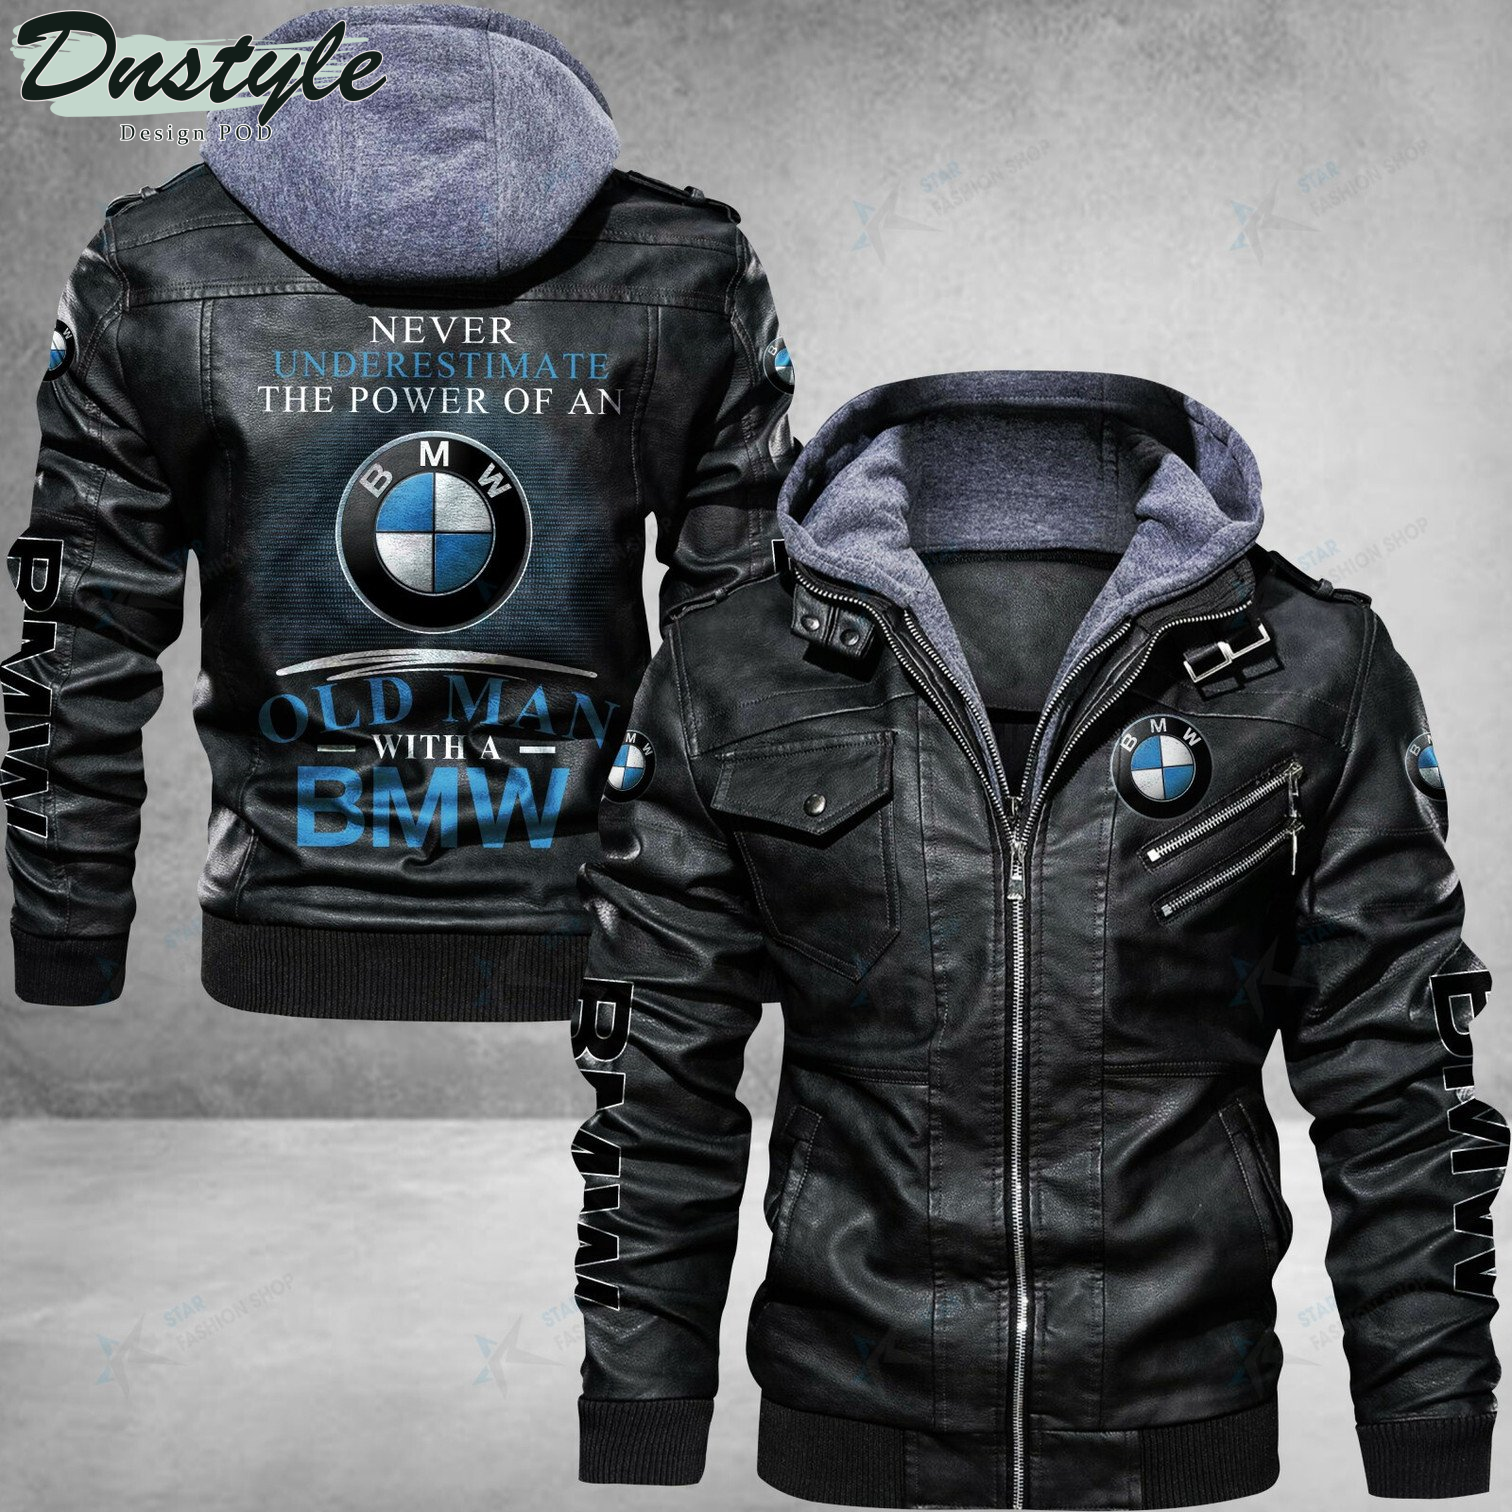 BMW never underestimate the power of an old man leather jacket